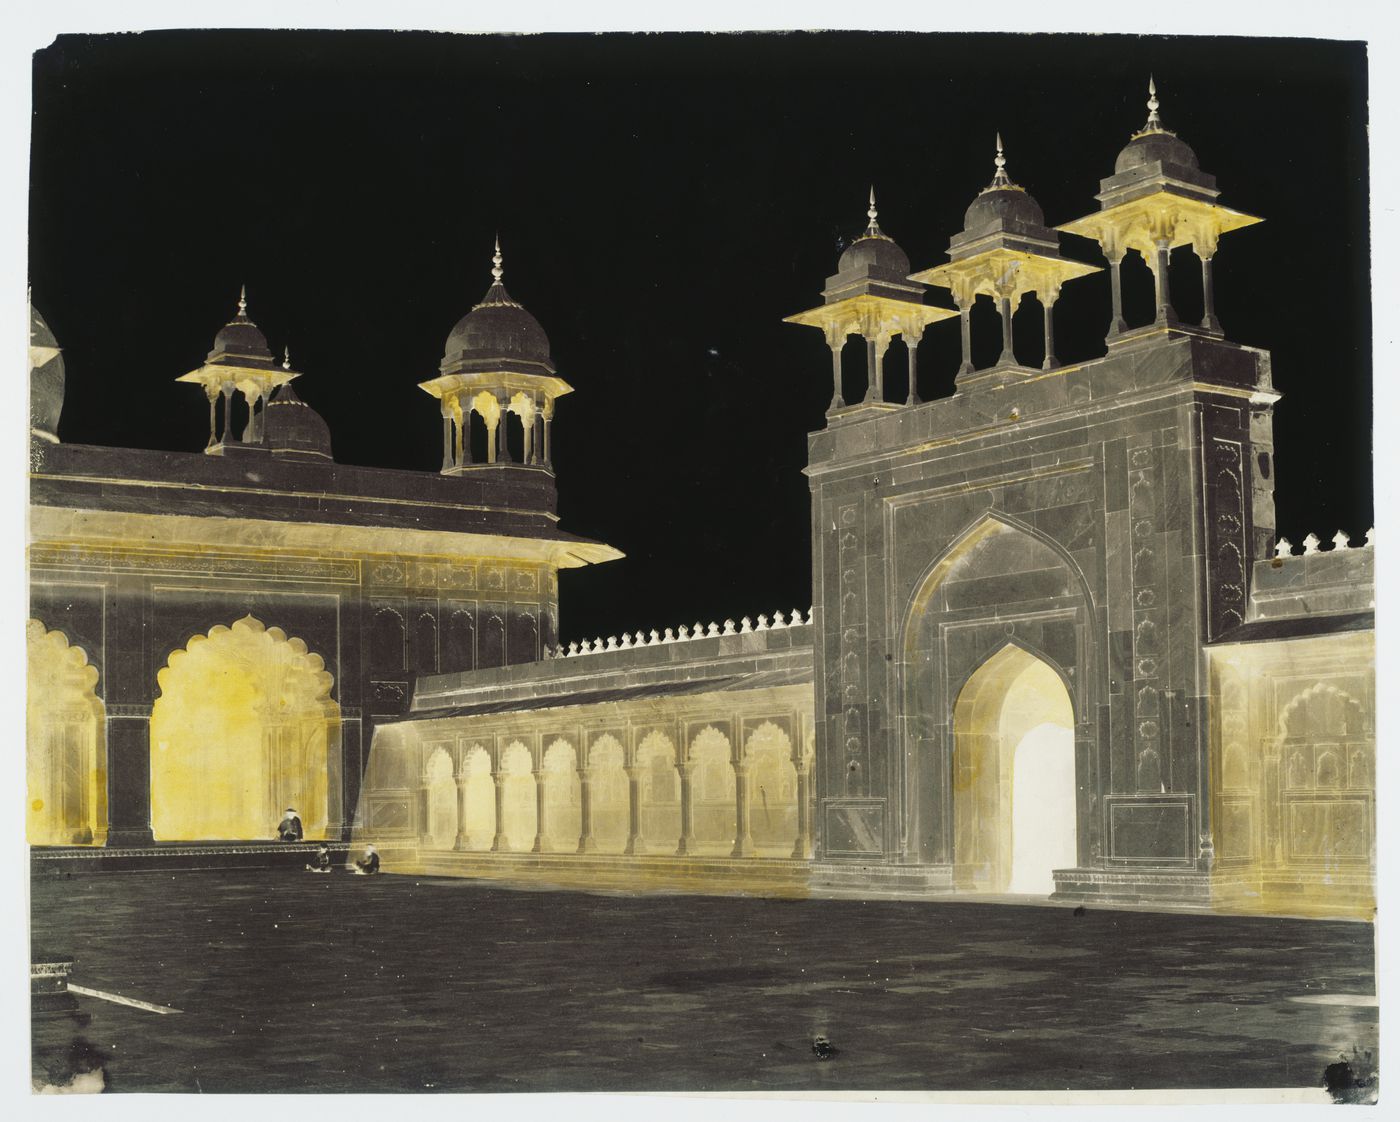 Partial view of the Moti Masjid [Pearl Mosque] showing part of the façade and the portal, Agra, India